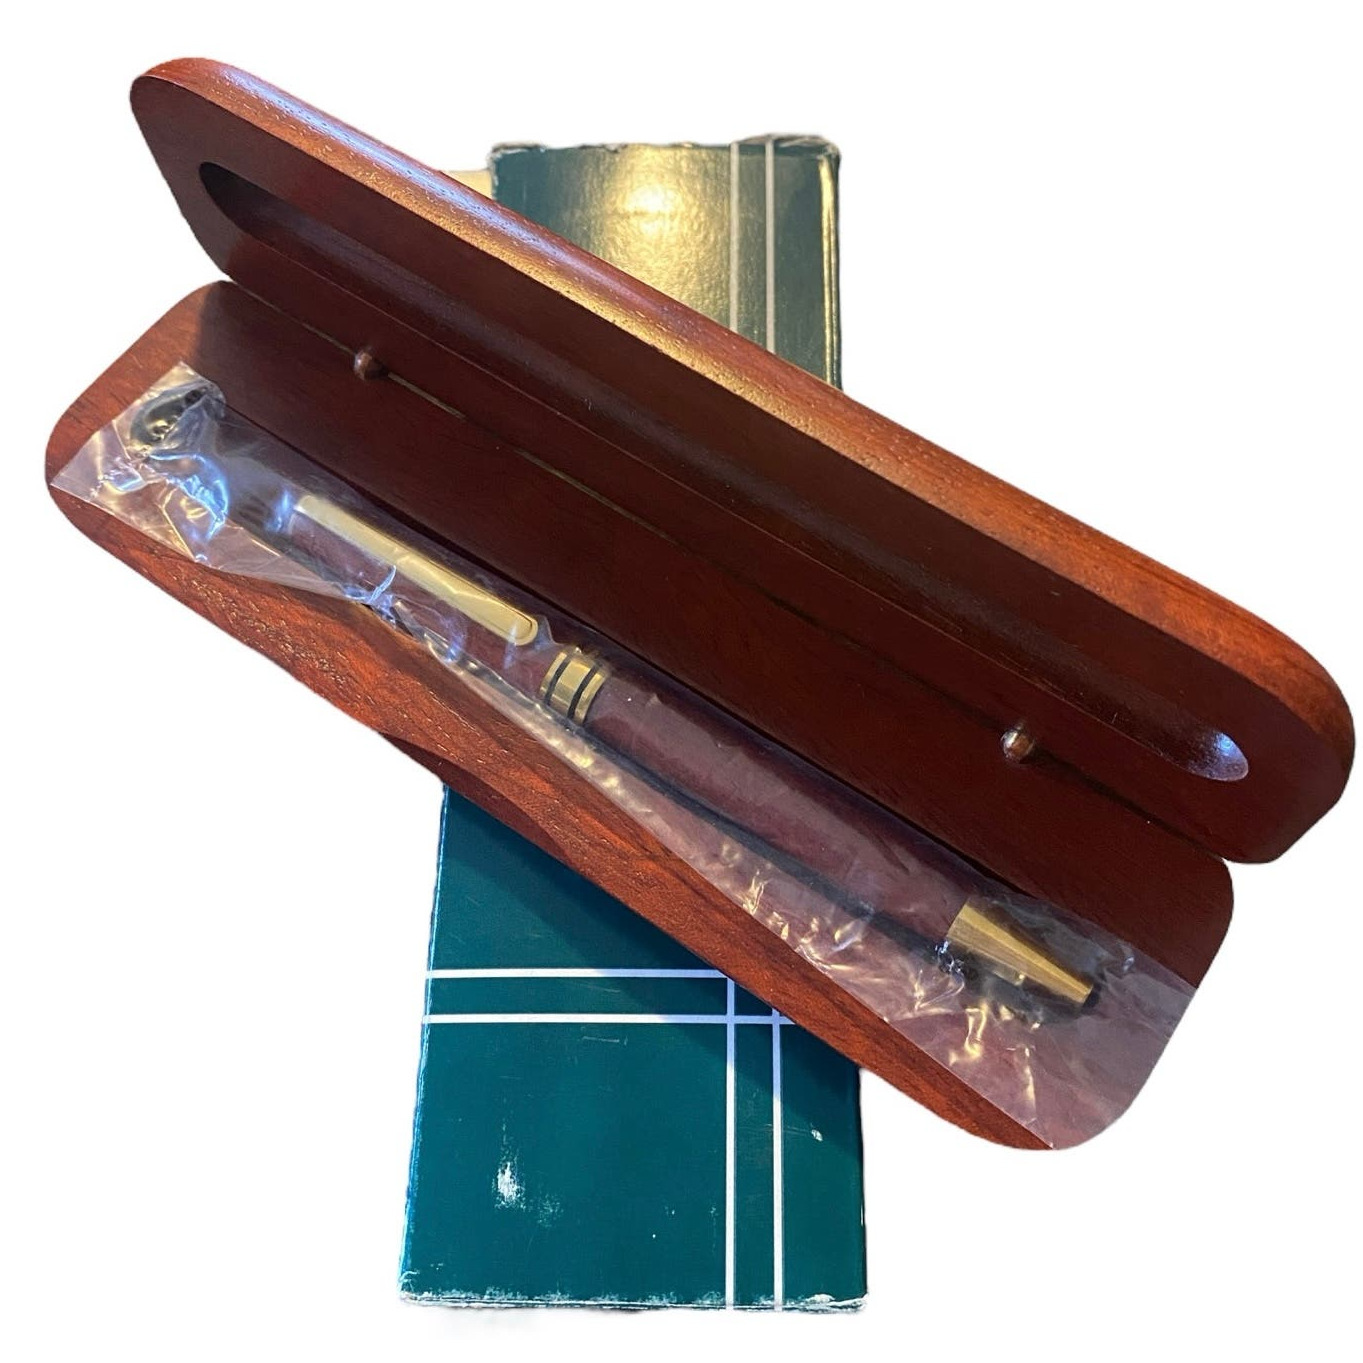 FedEx Appreciation Pen Rosewood with Rosewood Pen Boxed Vintage, Never Used